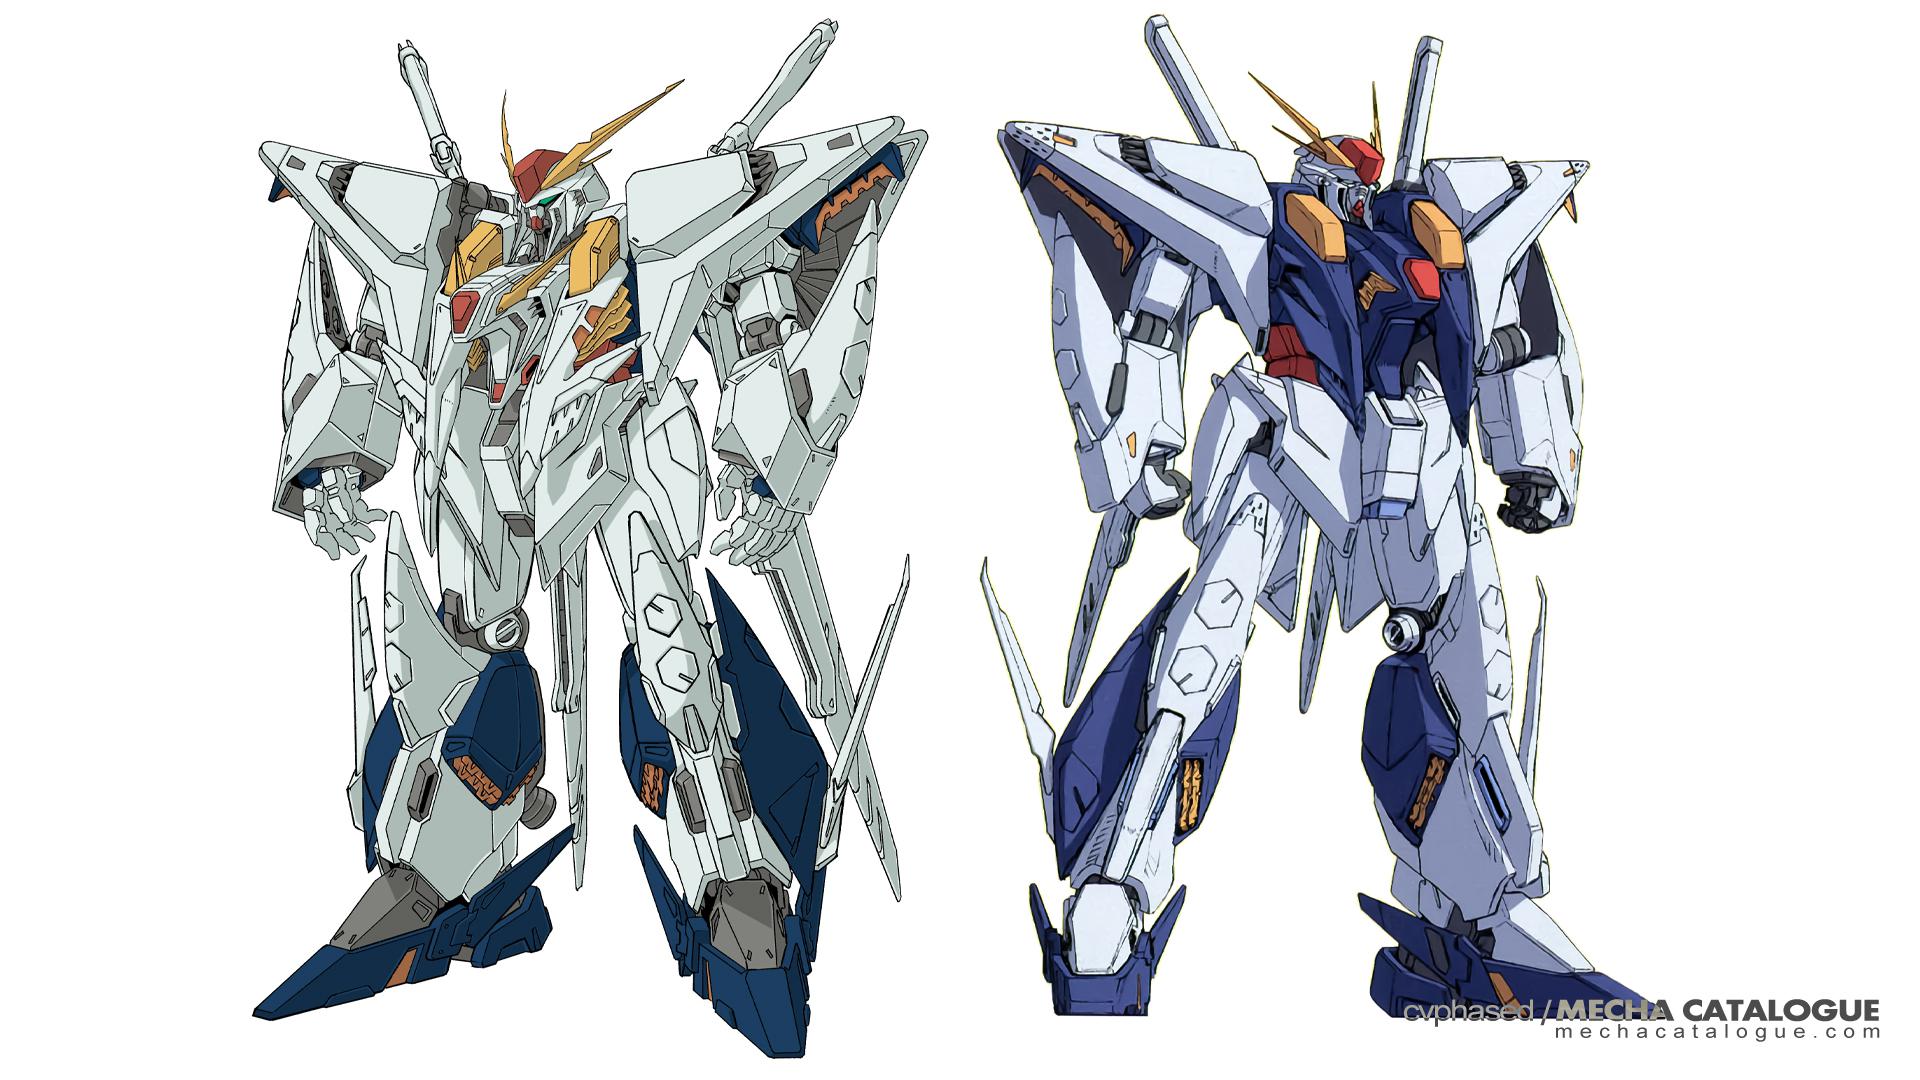 I have fallen in love with the Xi Gundam overnight. There are four different version of the Xi Gundam, which one is your favorite and why? I love the 1st Katoki one